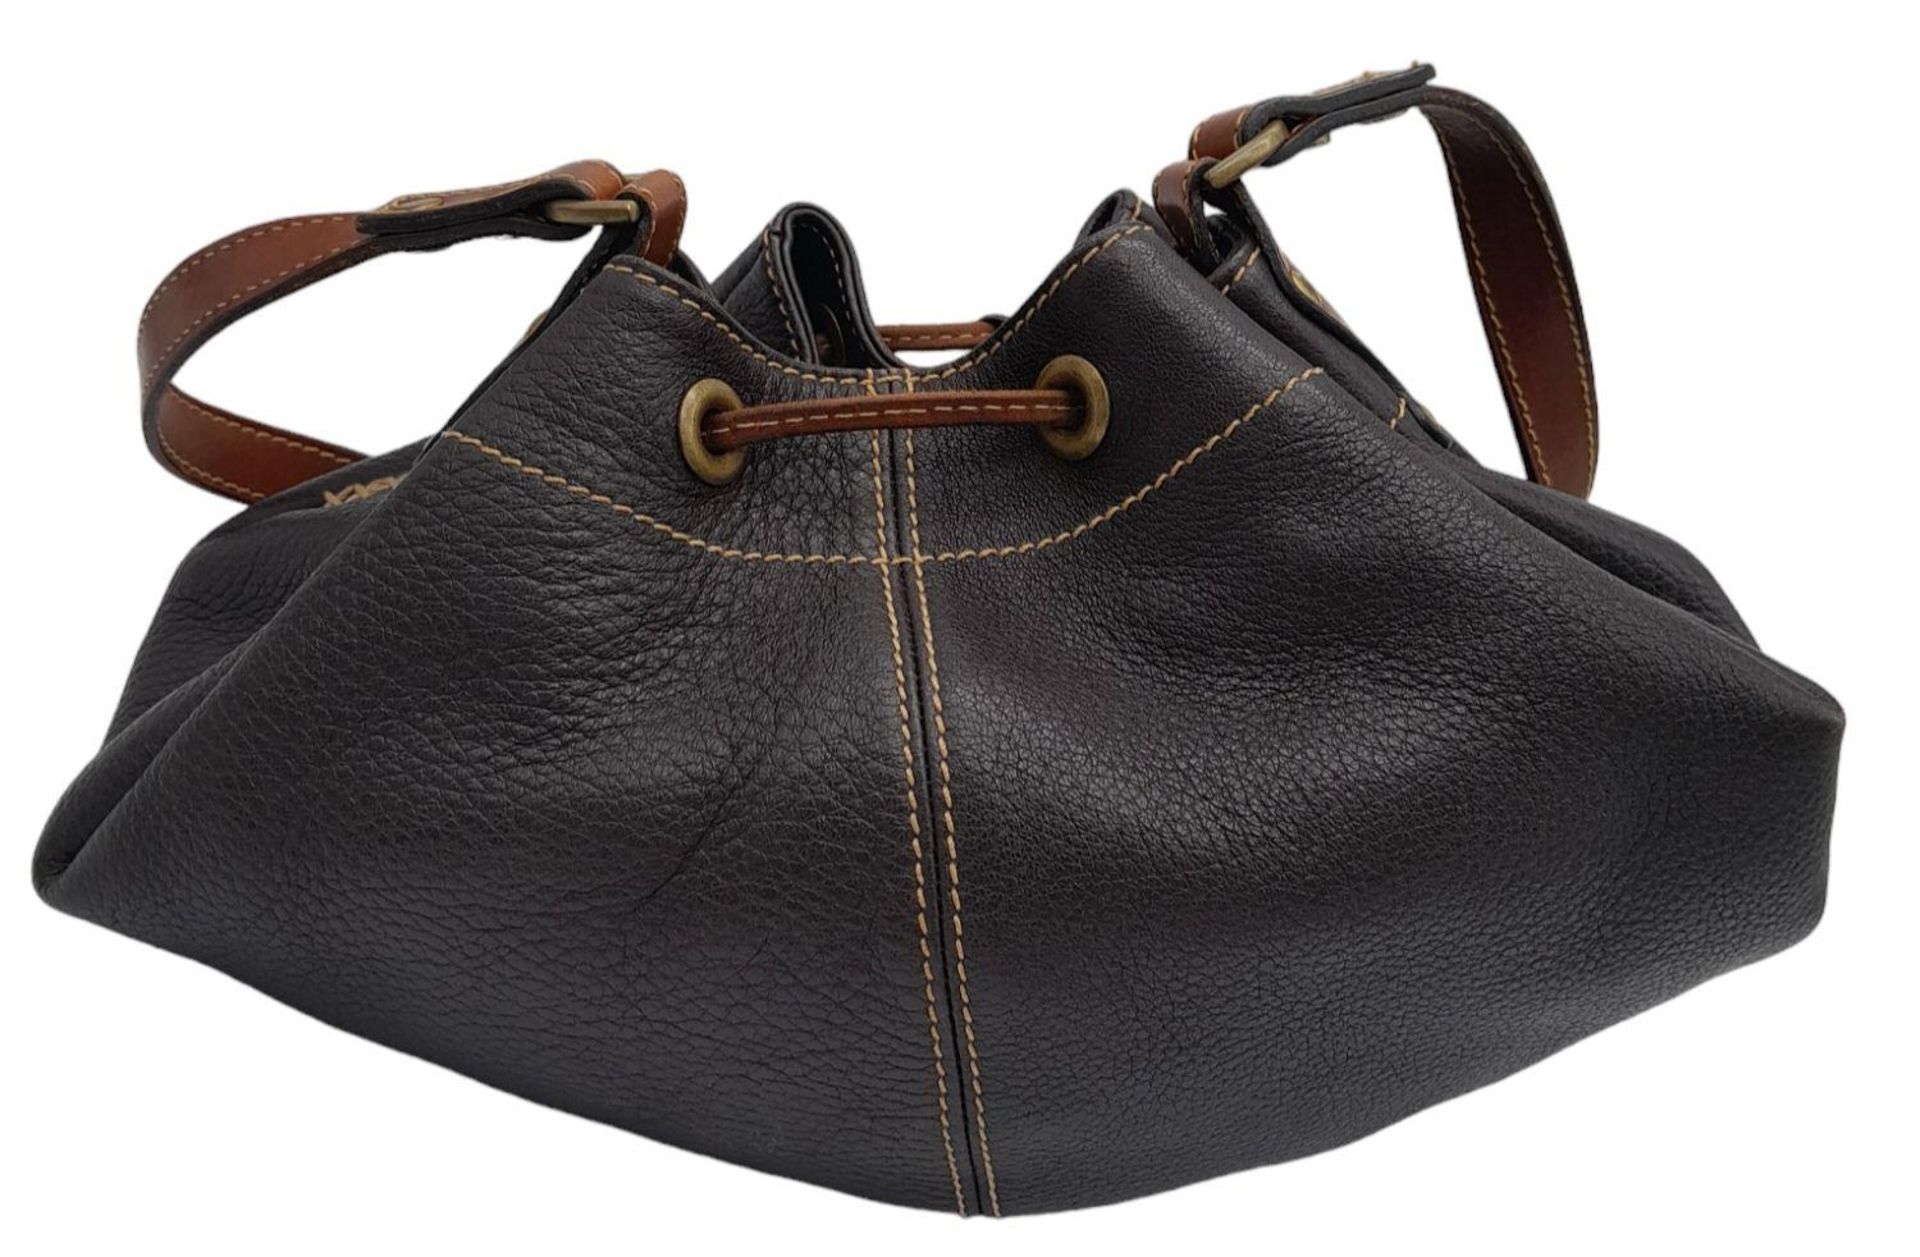 A Mulberry Brown Drawstring Bag. Leather exterior with gold-toned hardware, adjustable strap and - Image 3 of 9